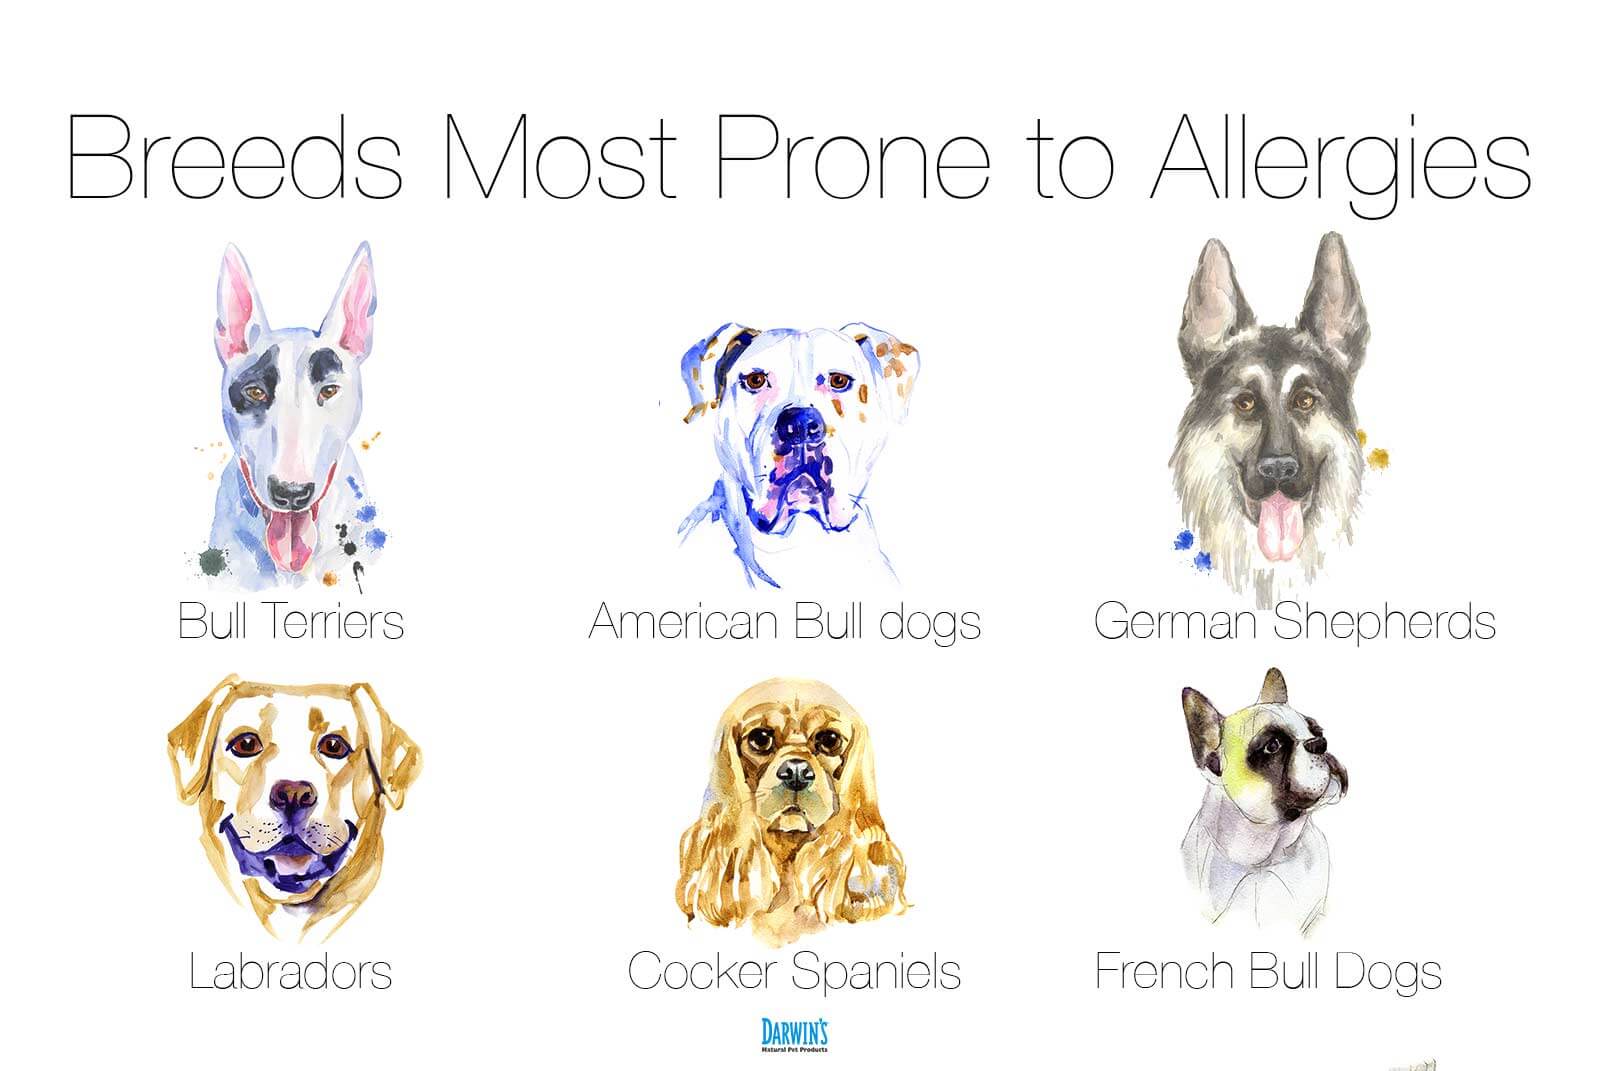 dogs and allergies